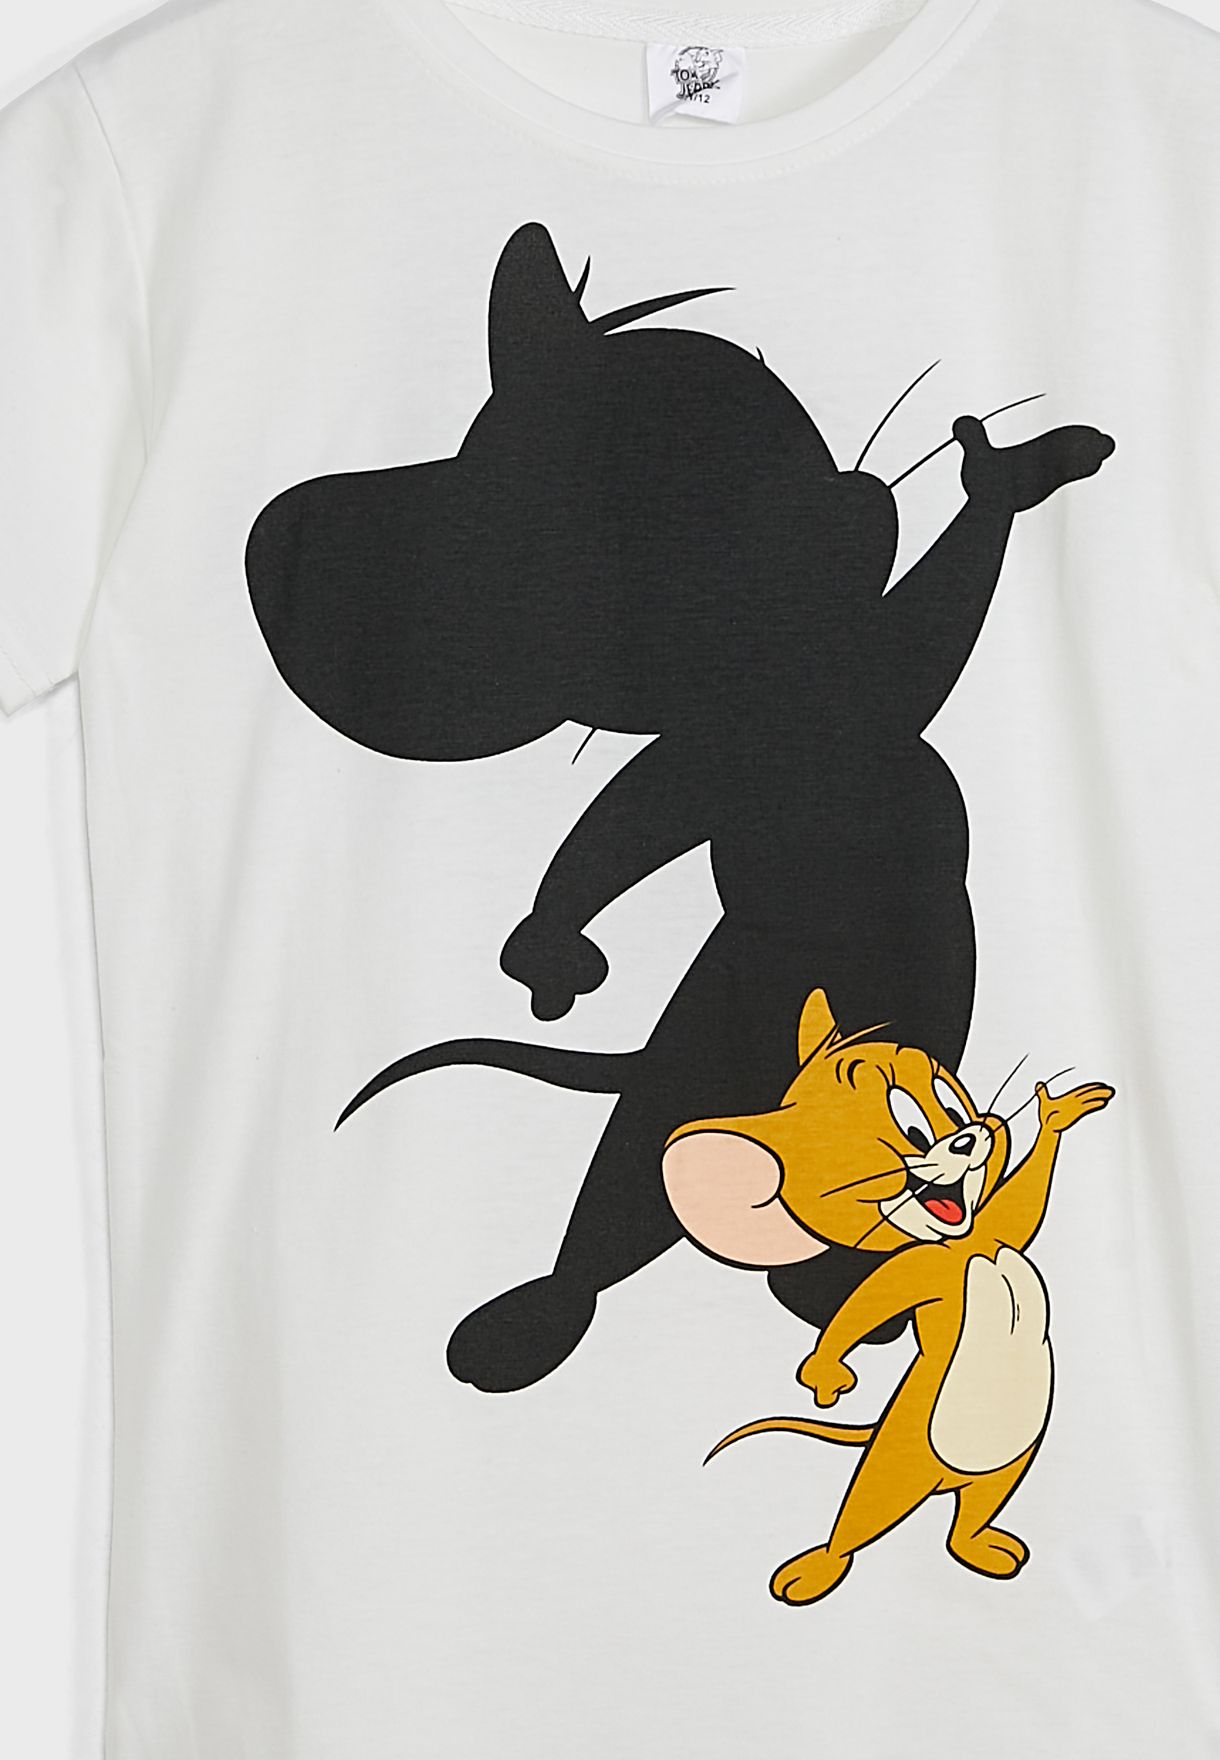 Youth Jerry T-Shirt